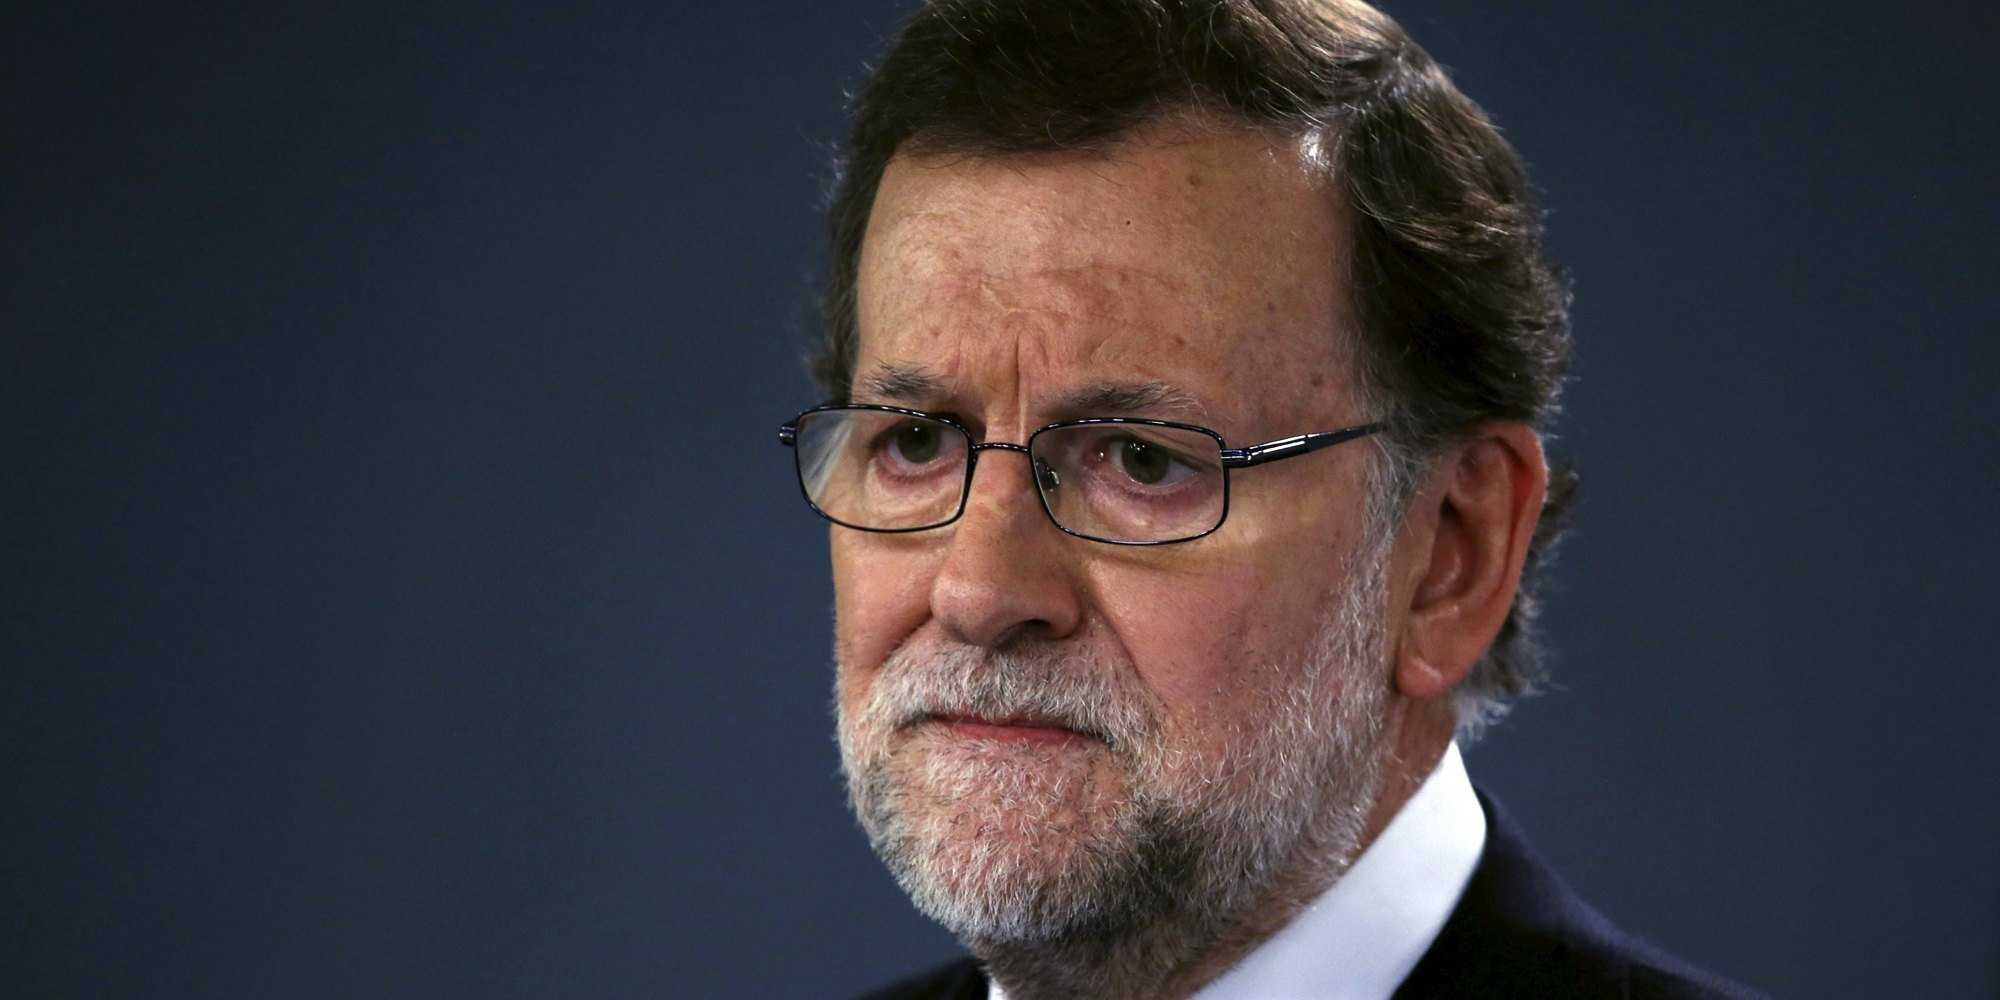 Spain's acting Prime Minister Mariano Rajoy is seen during a news conference after a cabinet meeting at Moncloa Palace in Madrid, Spain, in this December 29, 2015 file photo. To match SPAIN-ECONOMY/ REUTERS/Juan Medina/Files